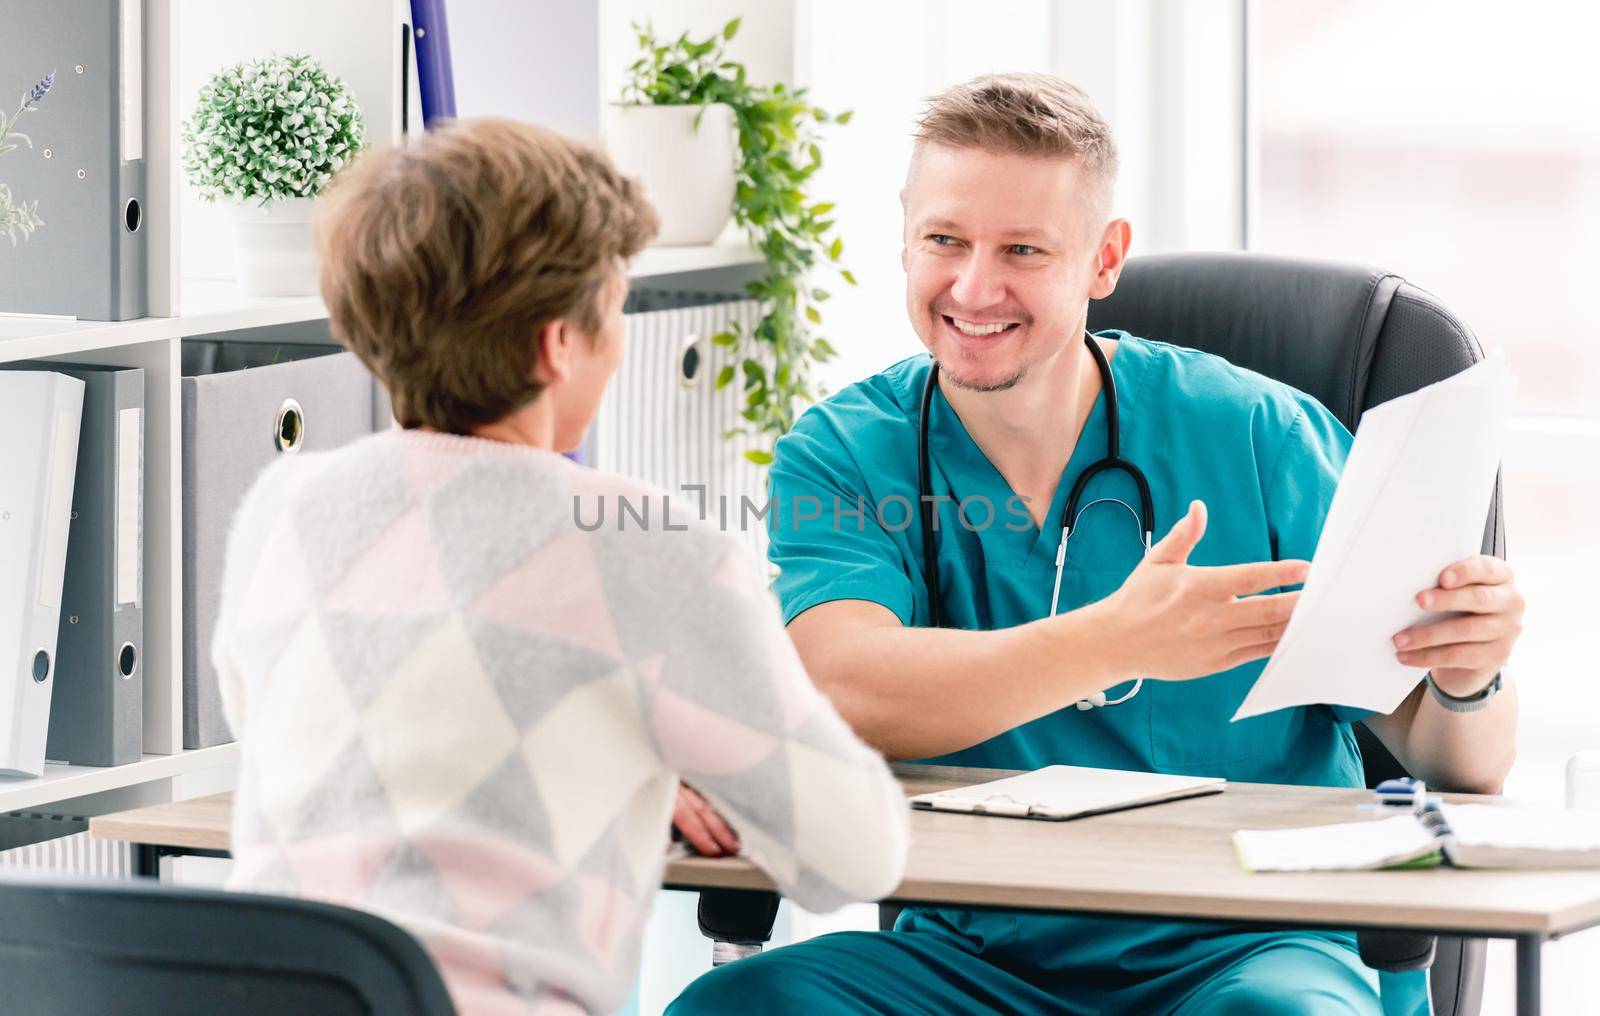 Smiling therapist talking to woman patient during appointment in medical clinic